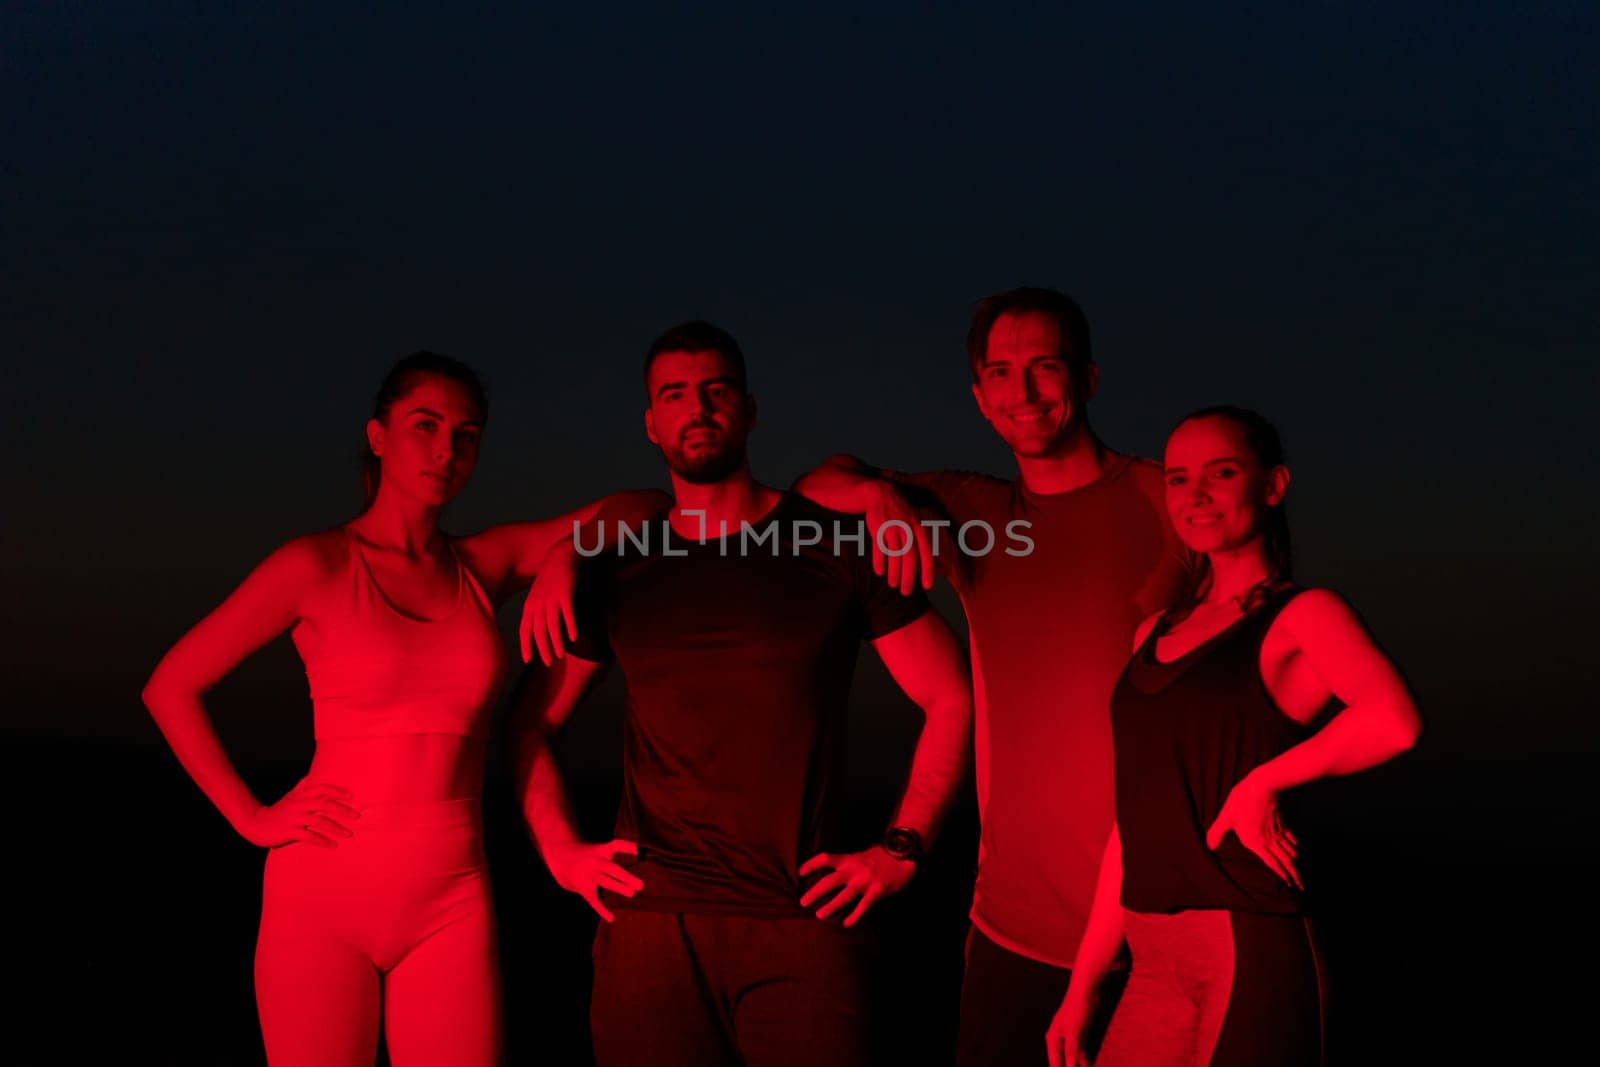 In the late-night hours, a diverse group of exhausted athletes find solace under a red glow, reflecting on their day-long marathon journey and celebrating camaraderie amidst fatigue.